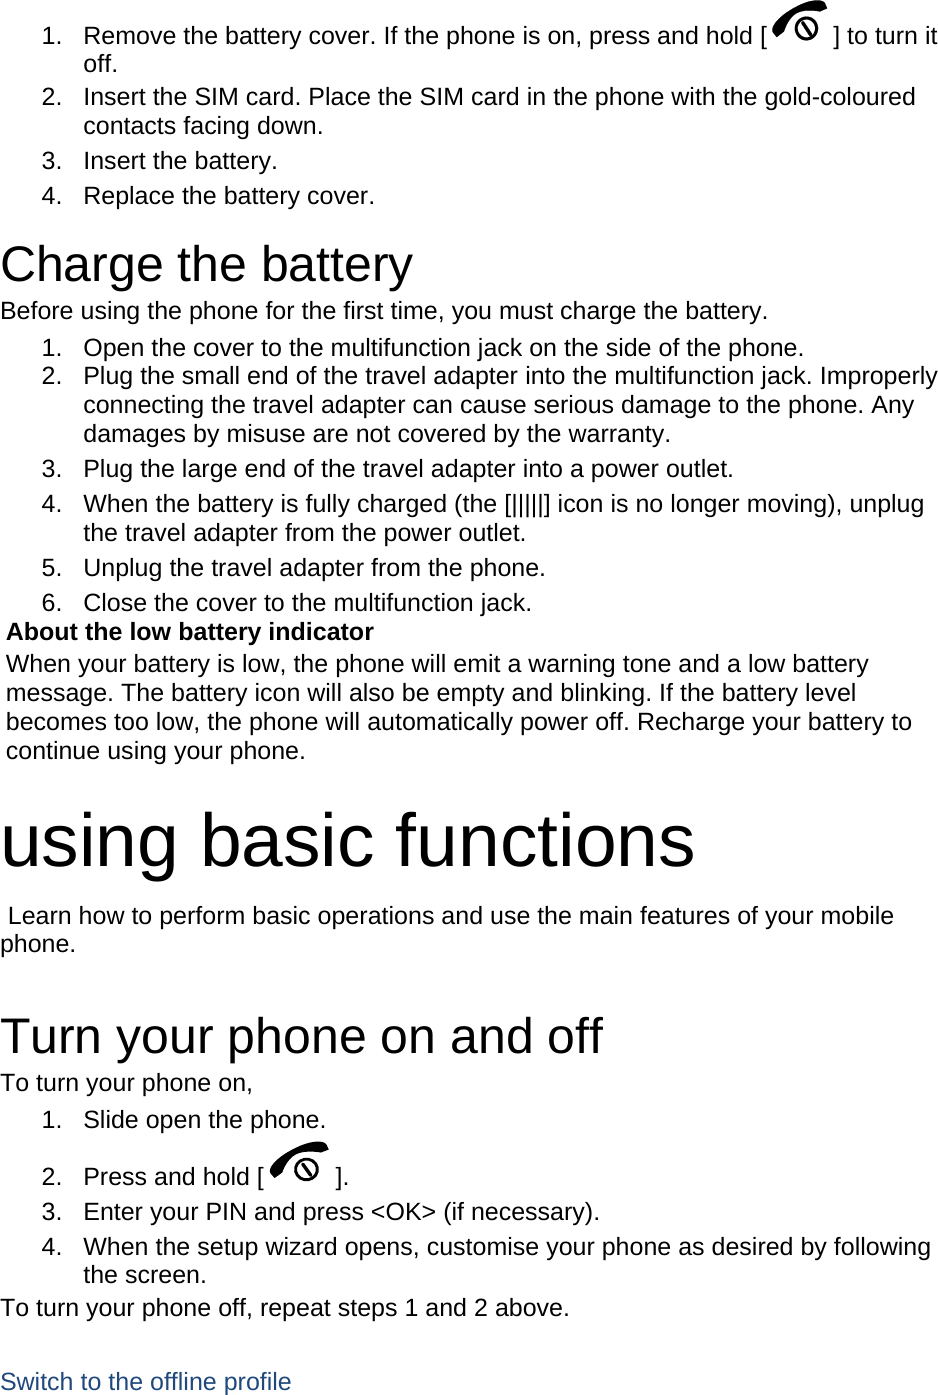 1.  Remove the battery cover. If the phone is on, press and hold [ ] to turn it off. 2.  Insert the SIM card. Place the SIM card in the phone with the gold-coloured contacts facing down. 3. Insert the battery. 4.  Replace the battery cover.  Charge the battery Before using the phone for the first time, you must charge the battery. 1.  Open the cover to the multifunction jack on the side of the phone. 2.  Plug the small end of the travel adapter into the multifunction jack. Improperly connecting the travel adapter can cause serious damage to the phone. Any damages by misuse are not covered by the warranty. 3.  Plug the large end of the travel adapter into a power outlet. 4.  When the battery is fully charged (the [|||||] icon is no longer moving), unplug the travel adapter from the power outlet. 5.  Unplug the travel adapter from the phone. 6.  Close the cover to the multifunction jack. About the low battery indicator When your battery is low, the phone will emit a warning tone and a low battery message. The battery icon will also be empty and blinking. If the battery level becomes too low, the phone will automatically power off. Recharge your battery to continue using your phone.  using basic functions  Learn how to perform basic operations and use the main features of your mobile phone.   Turn your phone on and off To turn your phone on, 1.  Slide open the phone. 2.  Press and hold [ ]. 3.  Enter your PIN and press &lt;OK&gt; (if necessary). 4.  When the setup wizard opens, customise your phone as desired by following the screen. To turn your phone off, repeat steps 1 and 2 above.  Switch to the offline profile 